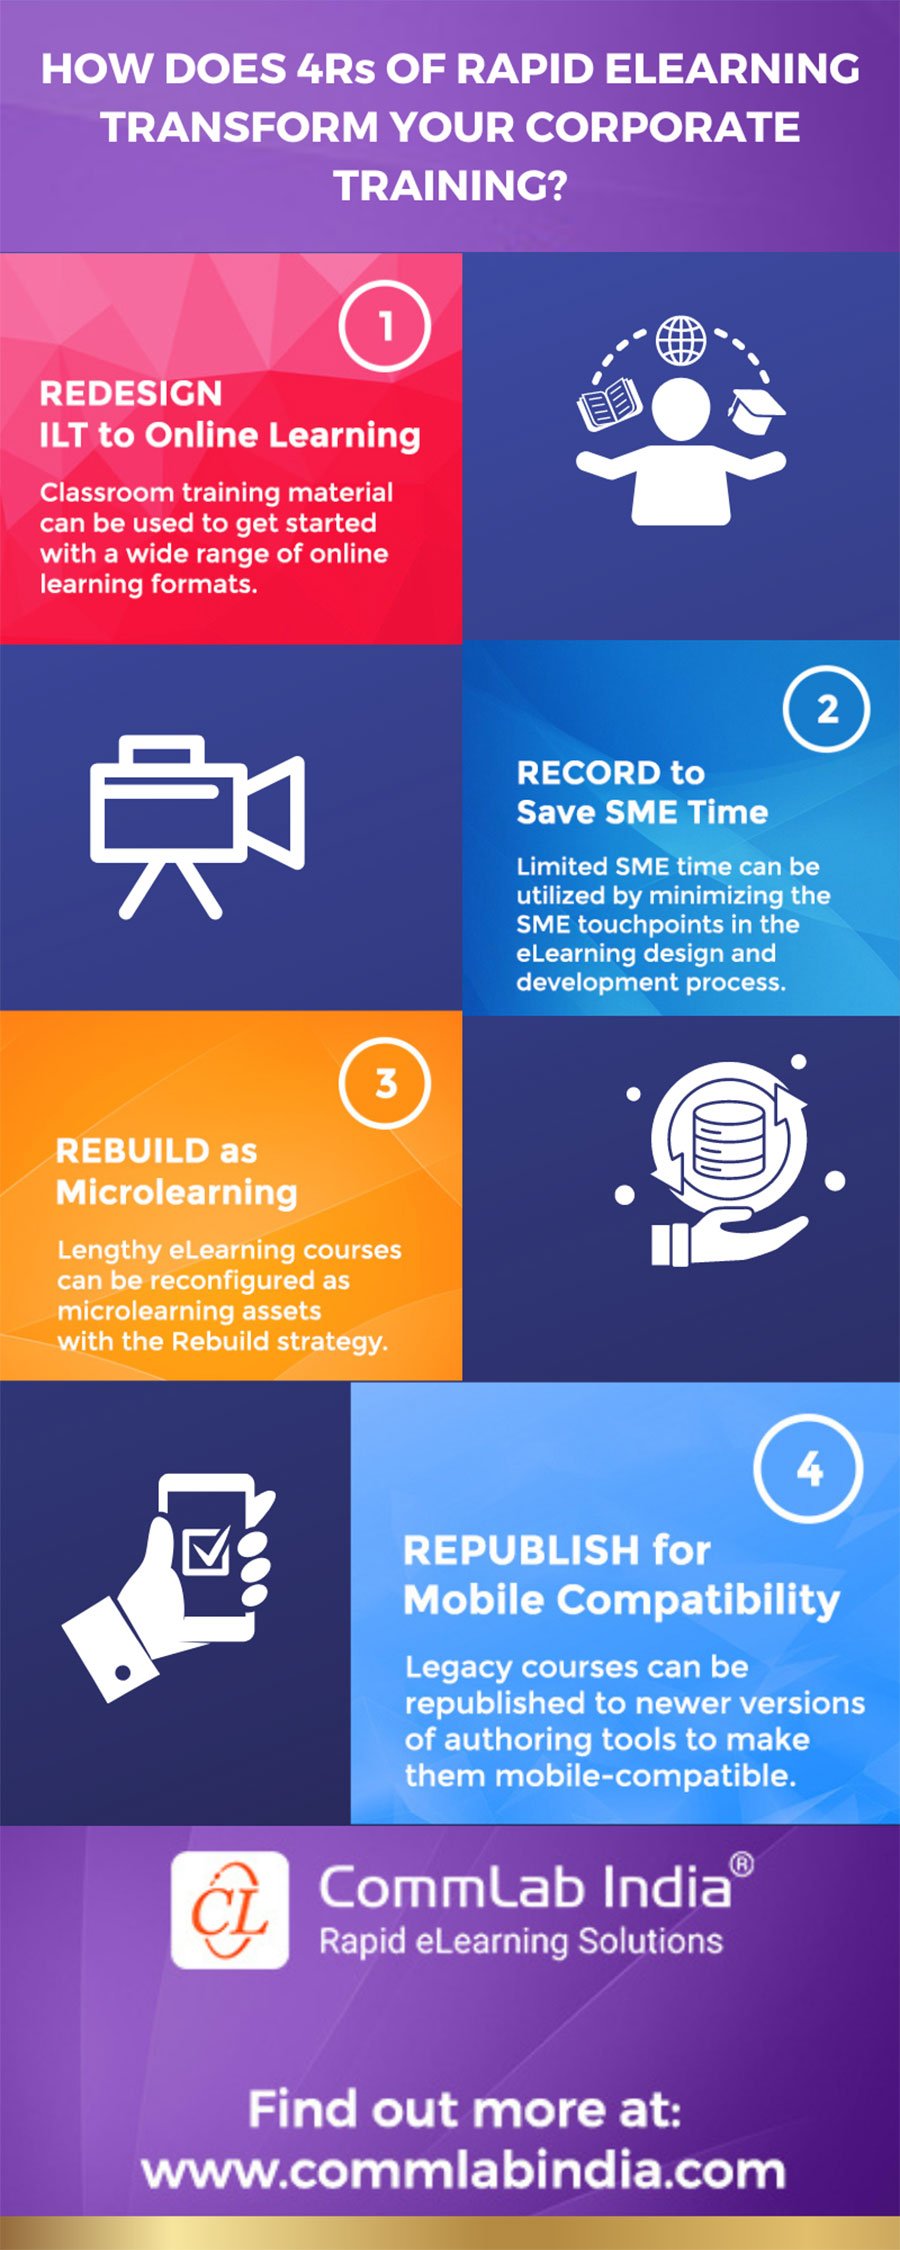 Rapid eLearning – How Its 4 Rs Transform Your Corporate Training? [Infographic]